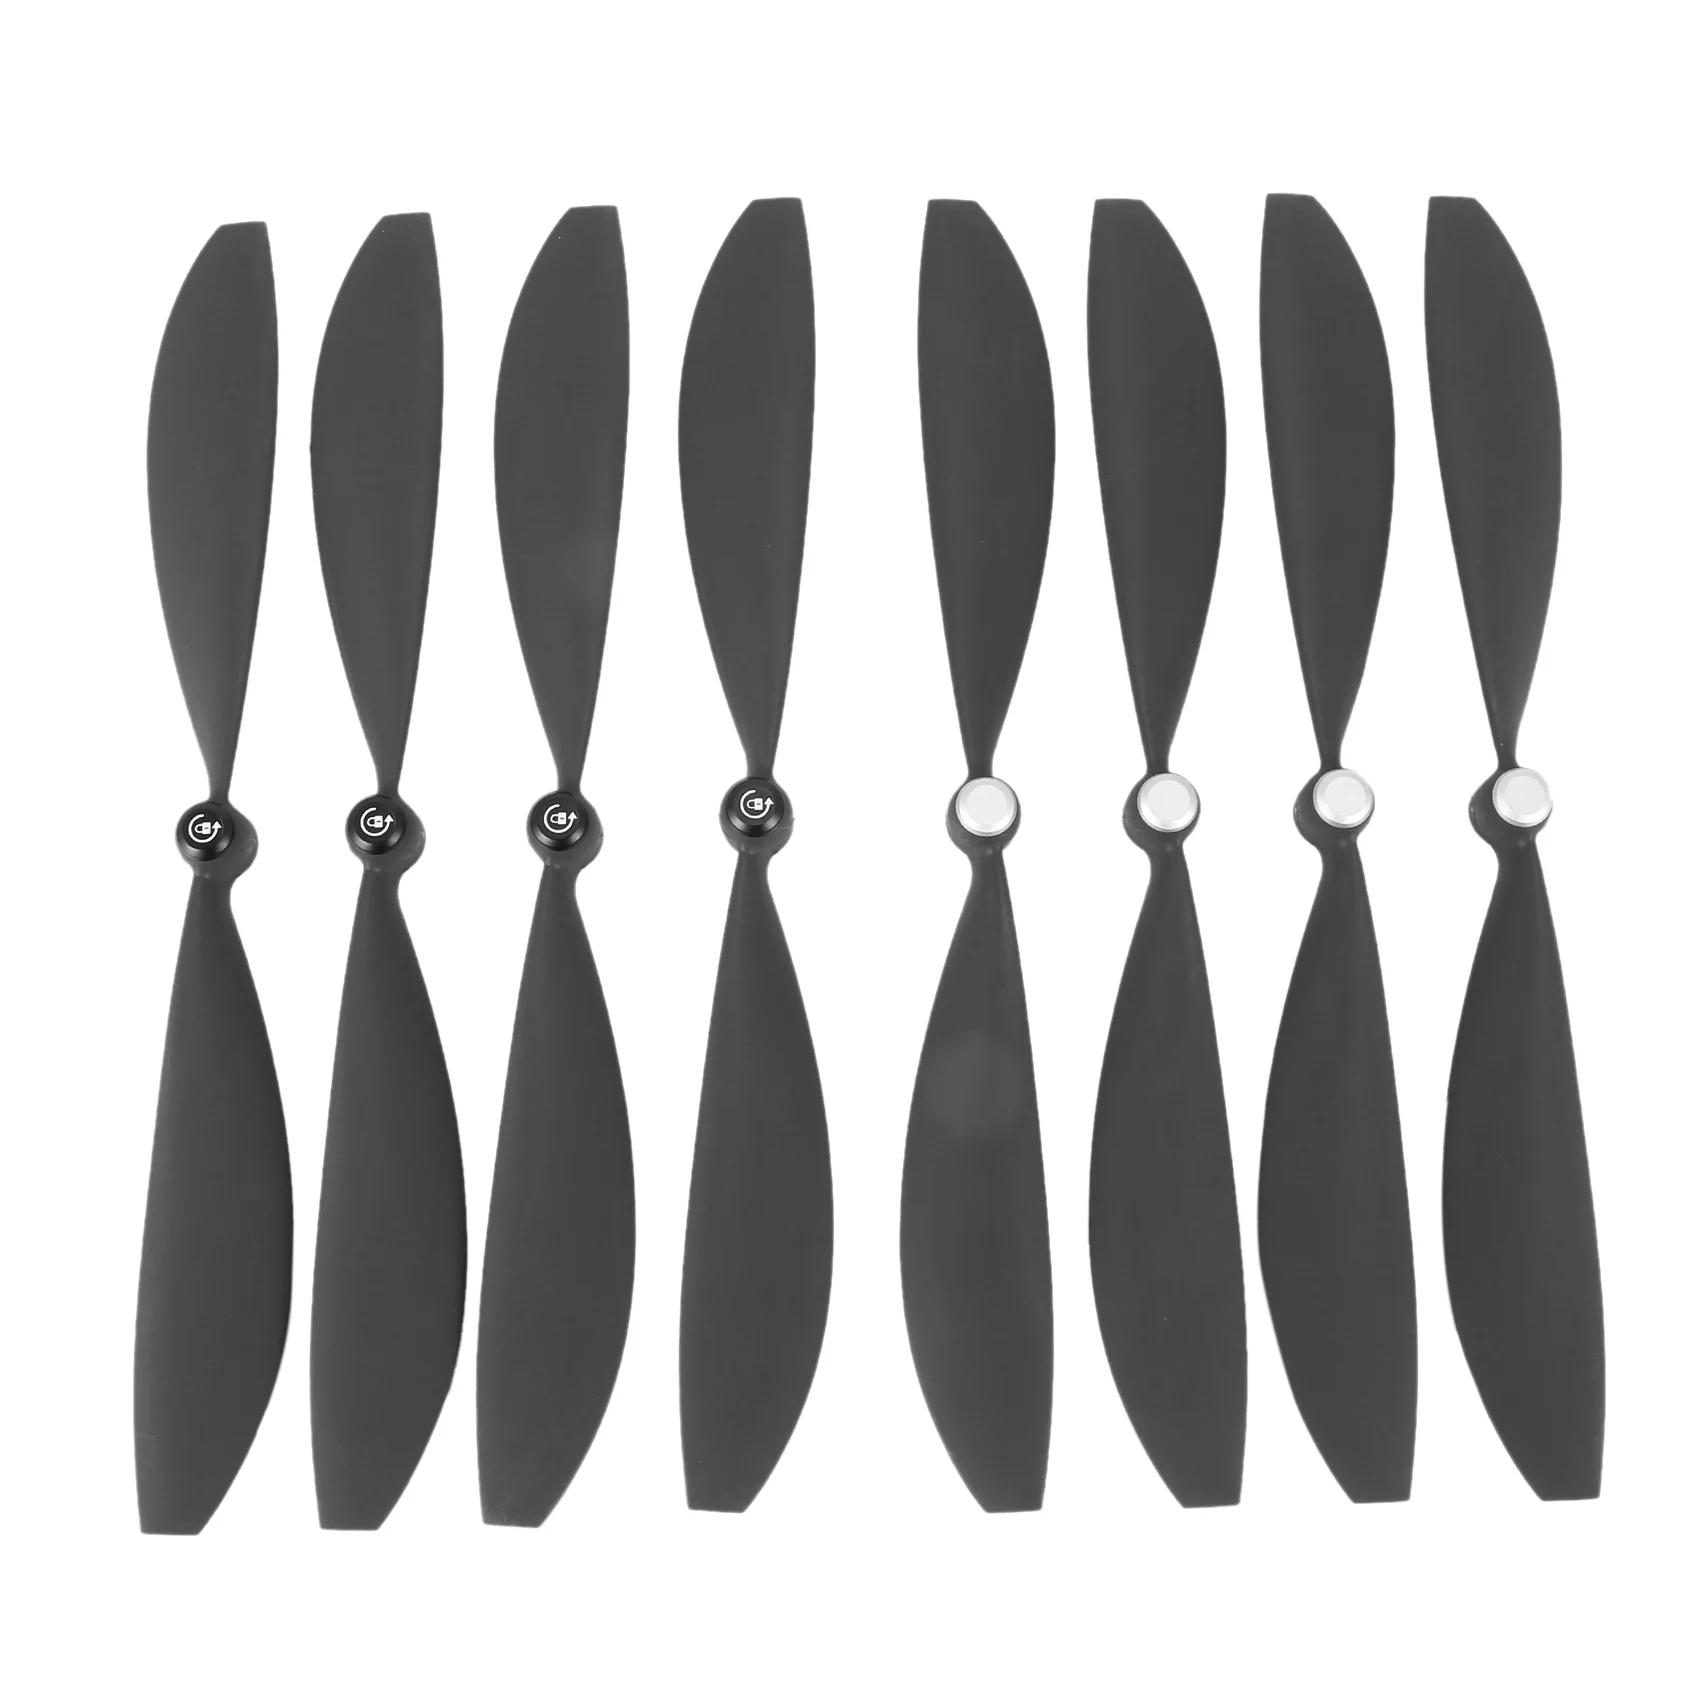 

8Pcs for Drone Propellers Blades Wings Accessories Parts for Gopro Karma Black D.21